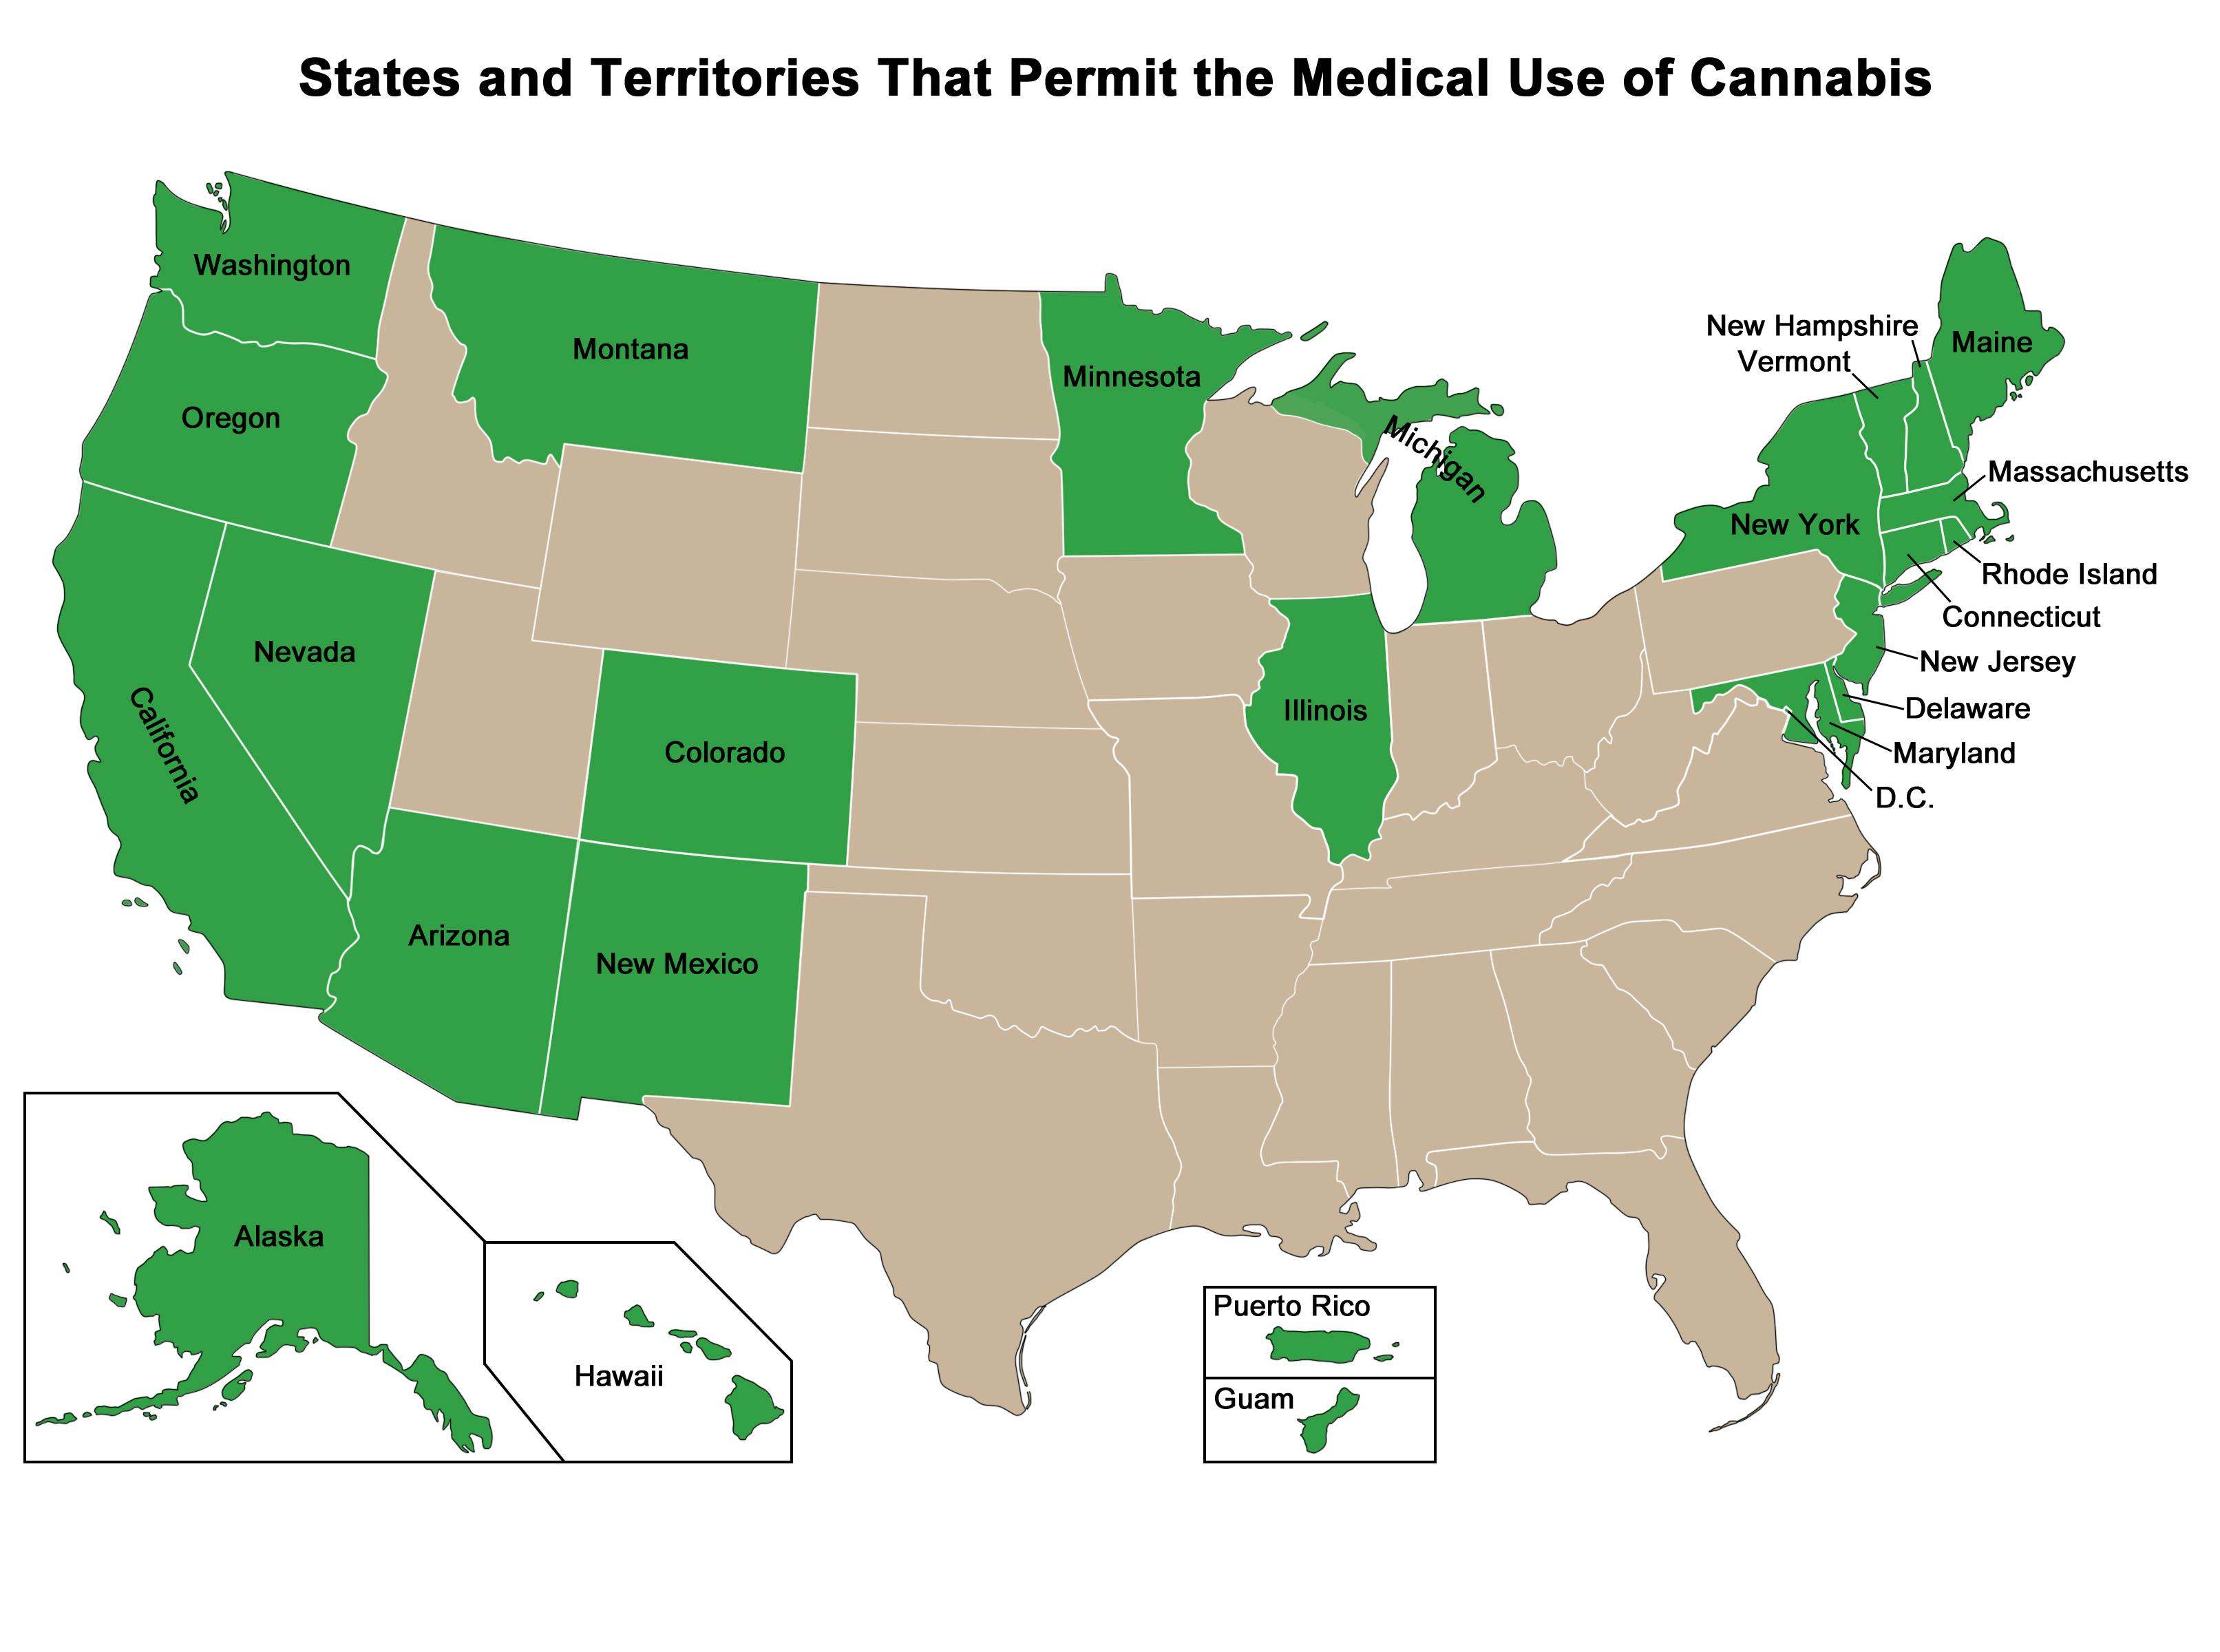 Although federal law prohibits the use of Cannabis, the states and territories shown on map permit its use for certain medical conditions. (Map from the National Cancer Institute)